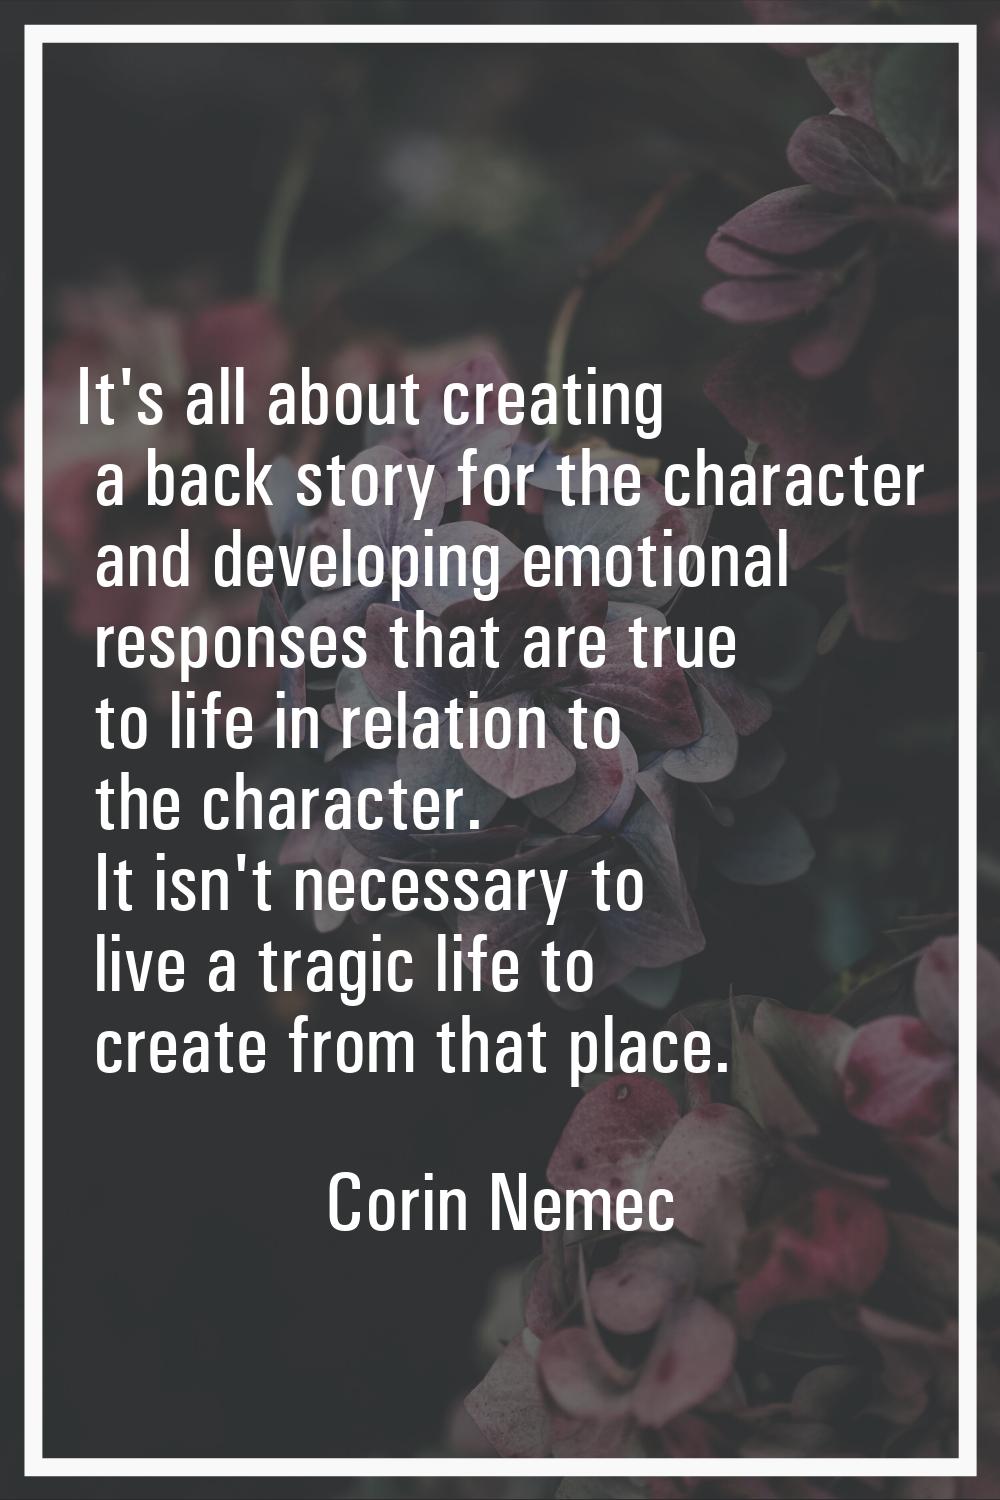 It's all about creating a back story for the character and developing emotional responses that are 